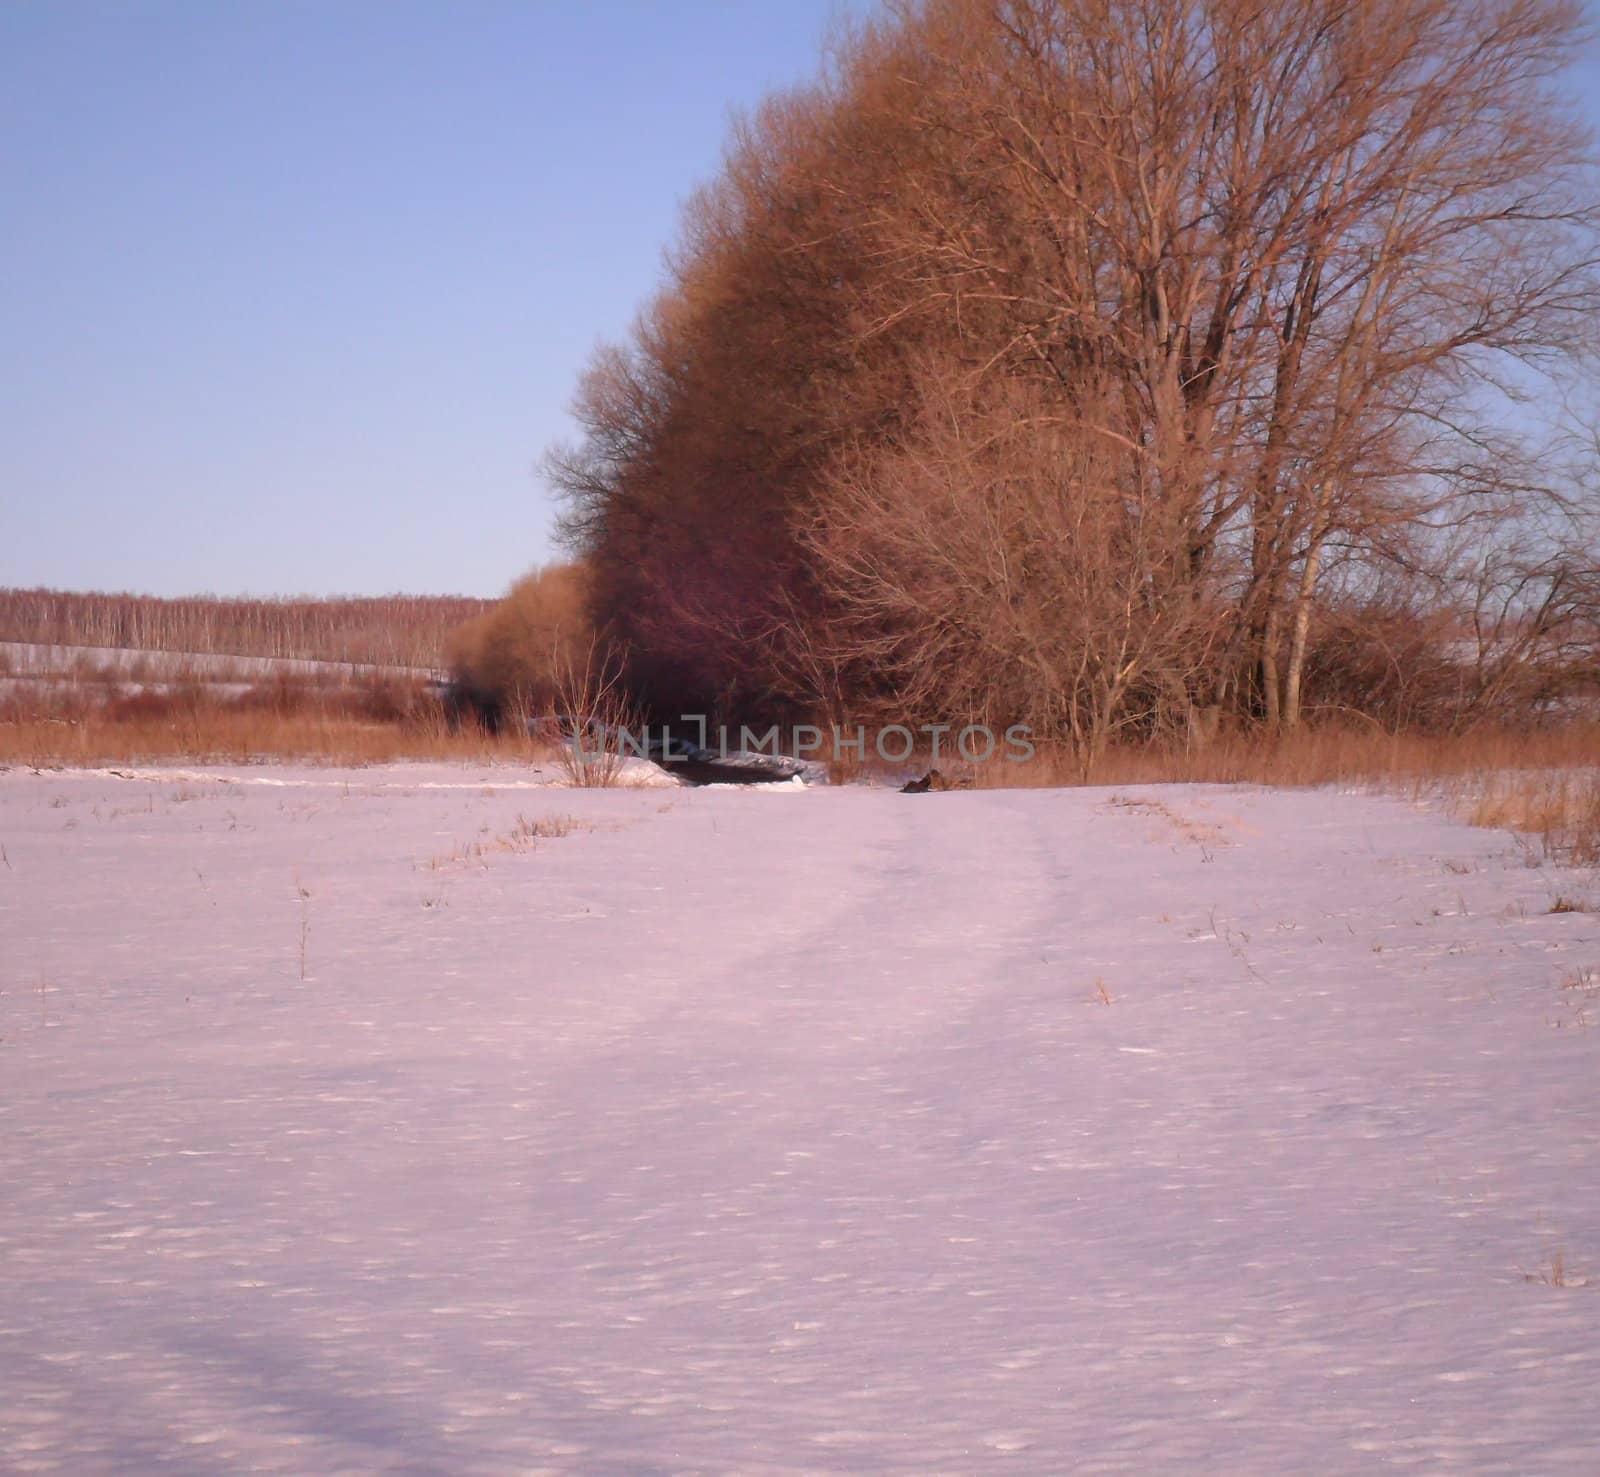 Winter landscape, snow-covered trees of the
field